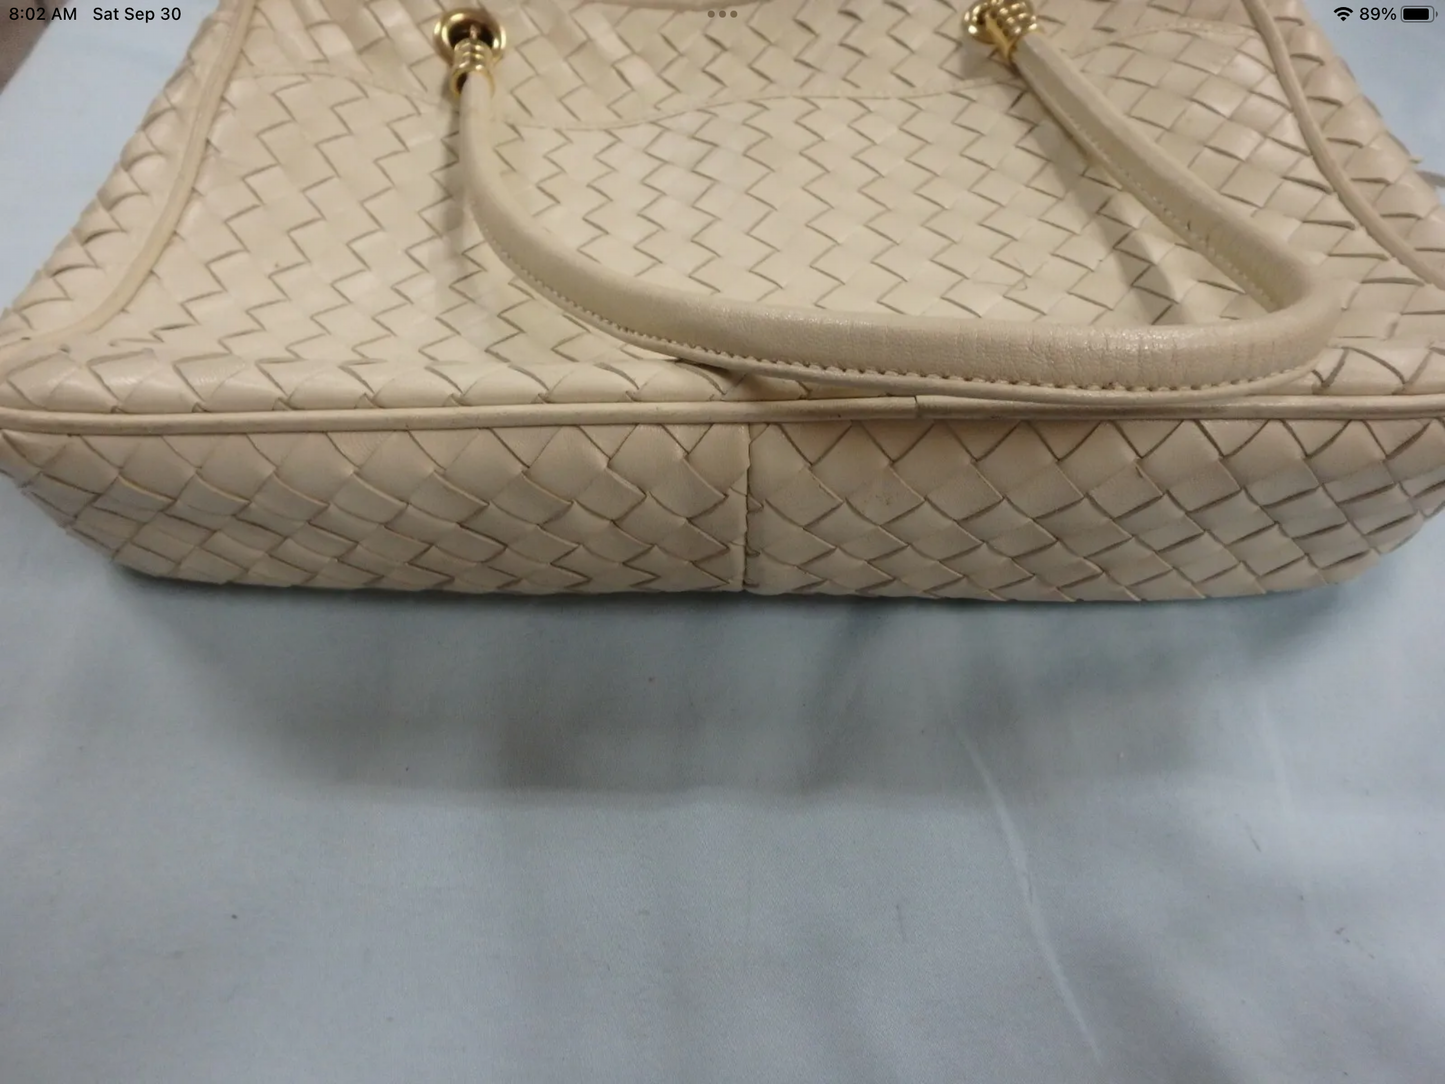 Firenze Croco Embossed Leather Bag Ivory Handbag Made in Italy